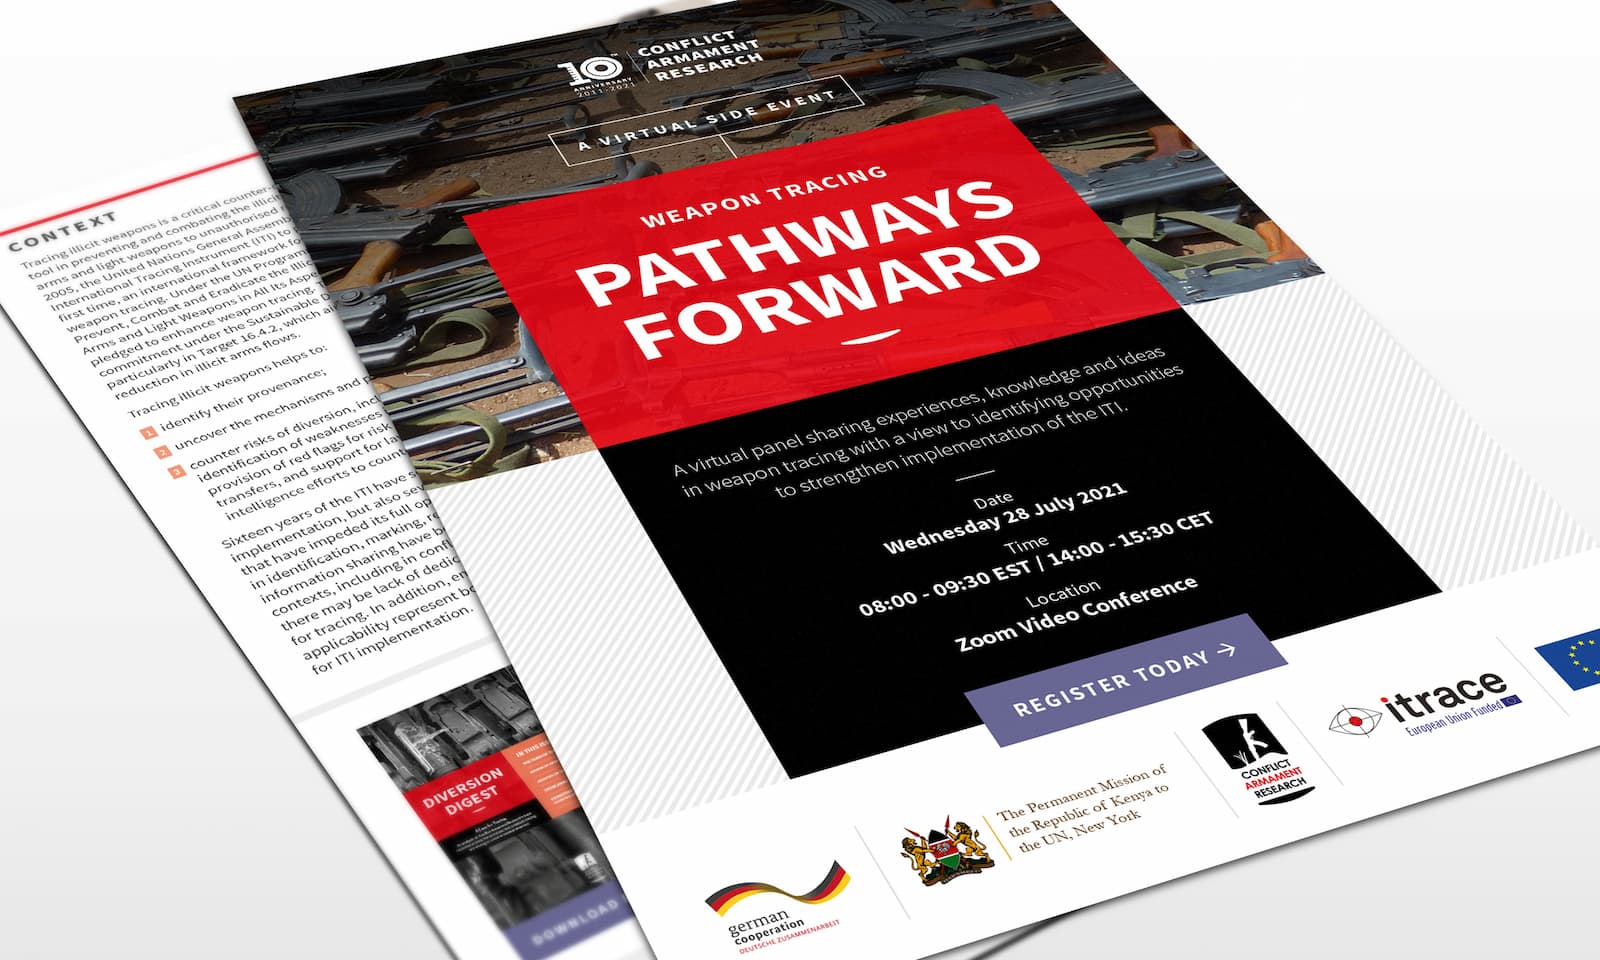 Pathways Forward - a weapon tracing conference - front side